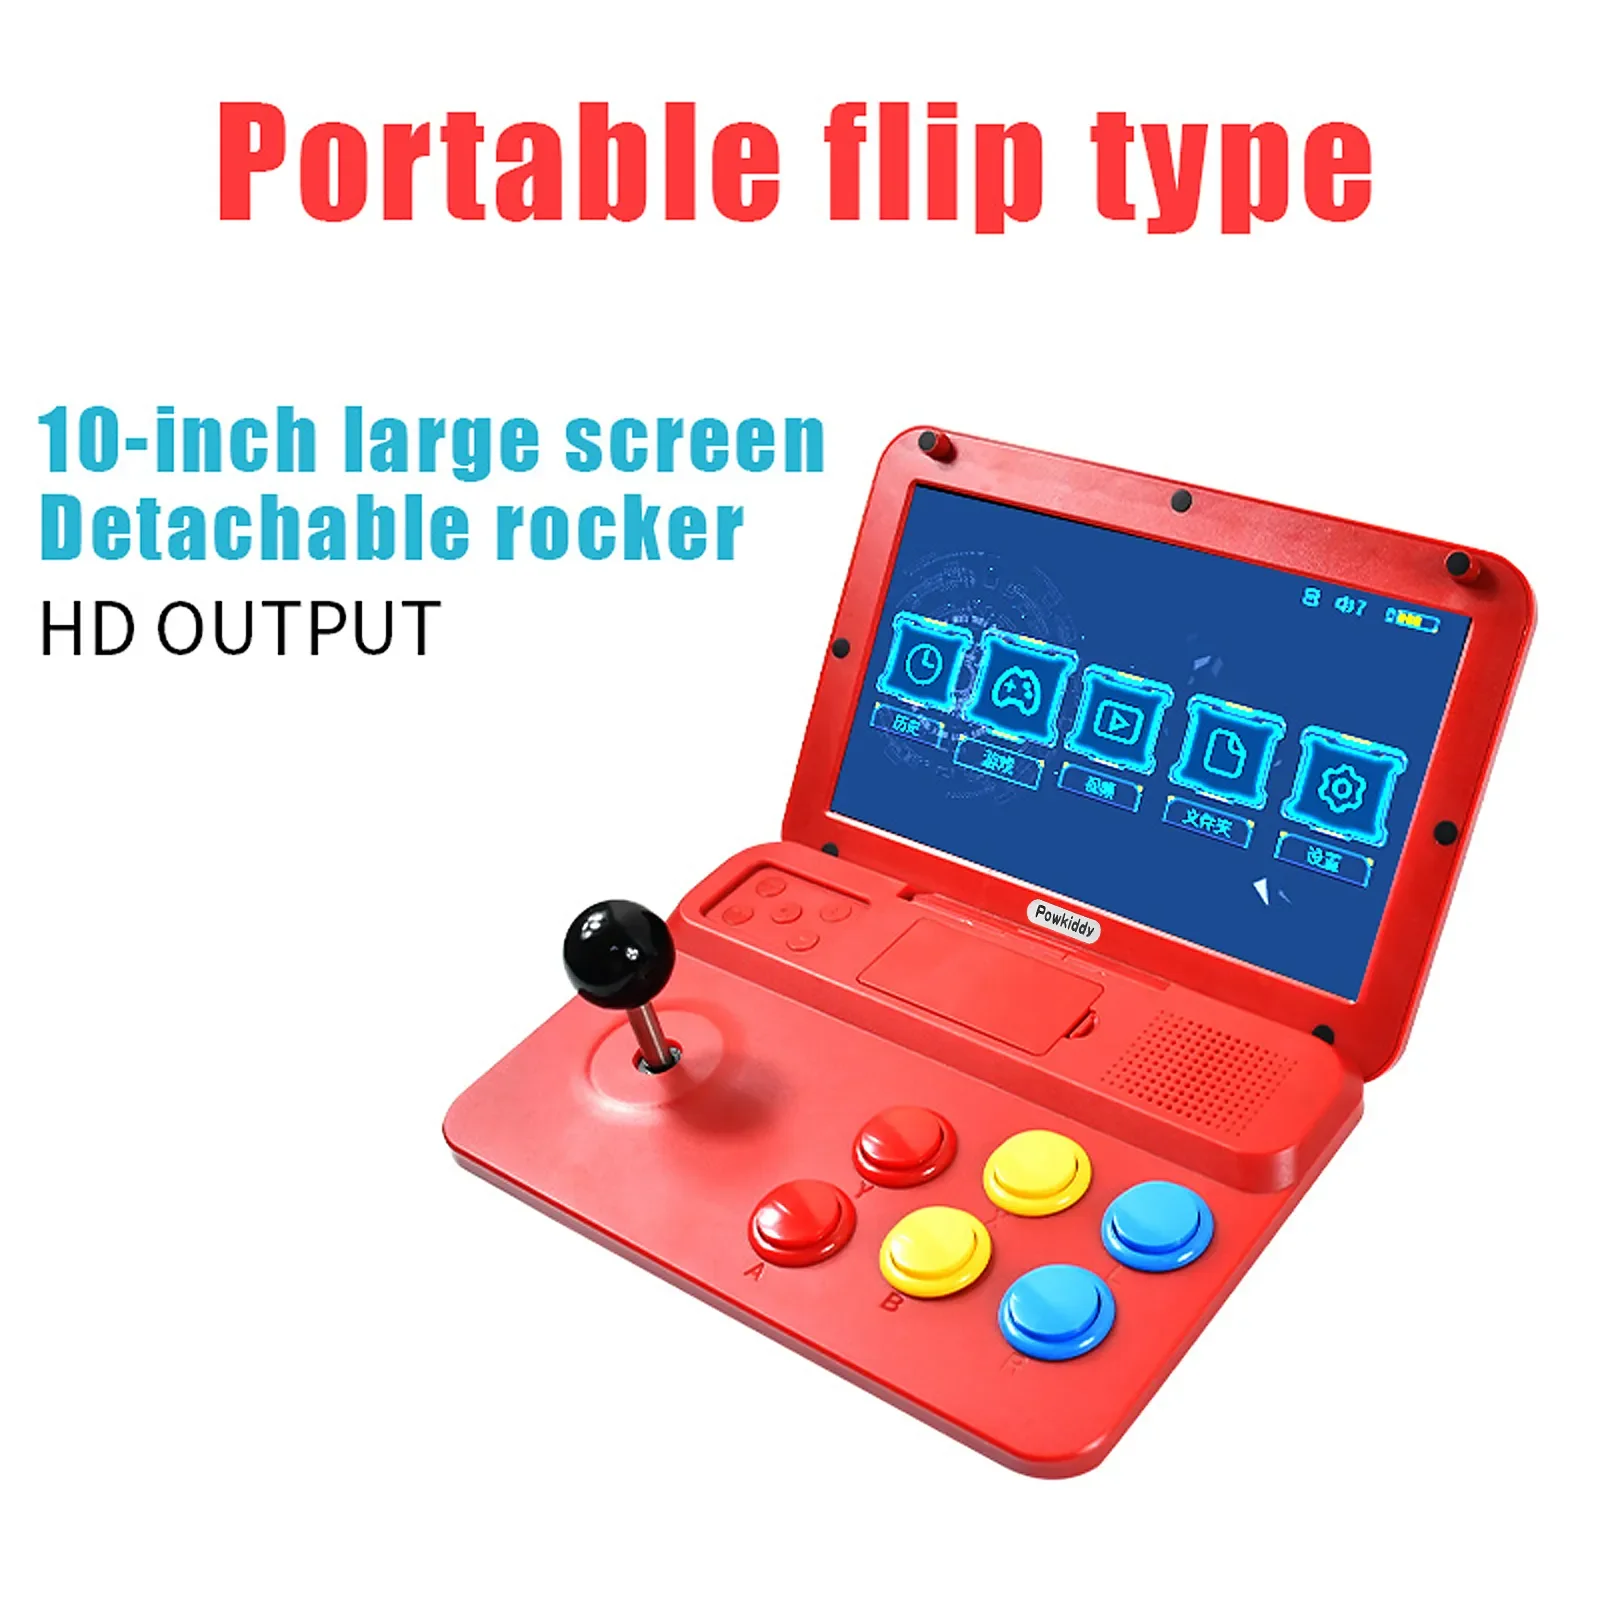 

Powkiddy A13 Video Game Console 10 Inch Large Screen Detachable Joystick HD Output Mini Arcade Retro Game Players